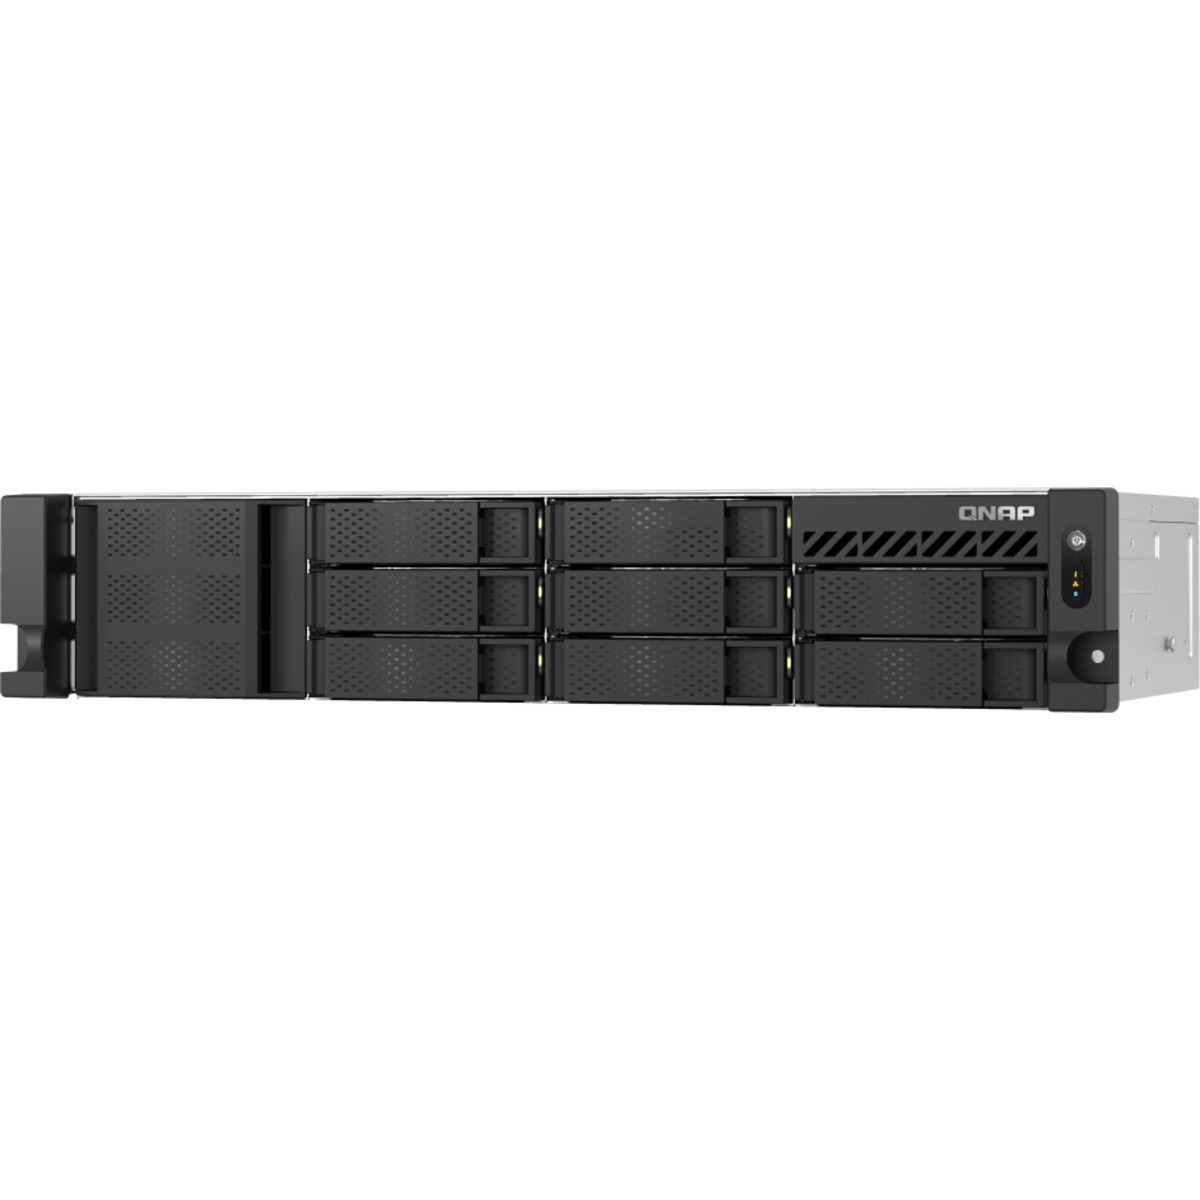 buy QNAP TS-855eU-RP 128tb RackMount NAS - Network Attached Storage Device 8x16000gb Seagate IronWolf Pro ST16000NT001 3.5 7200rpm SATA 6Gb/s HDD NAS Class Drives Installed - Burn-In Tested - ON SALE - FREE RAM UPGRADE - nas headquarters buy network attached storage server device das new raid-5 free shipping usa spring sale TS-855eU-RP